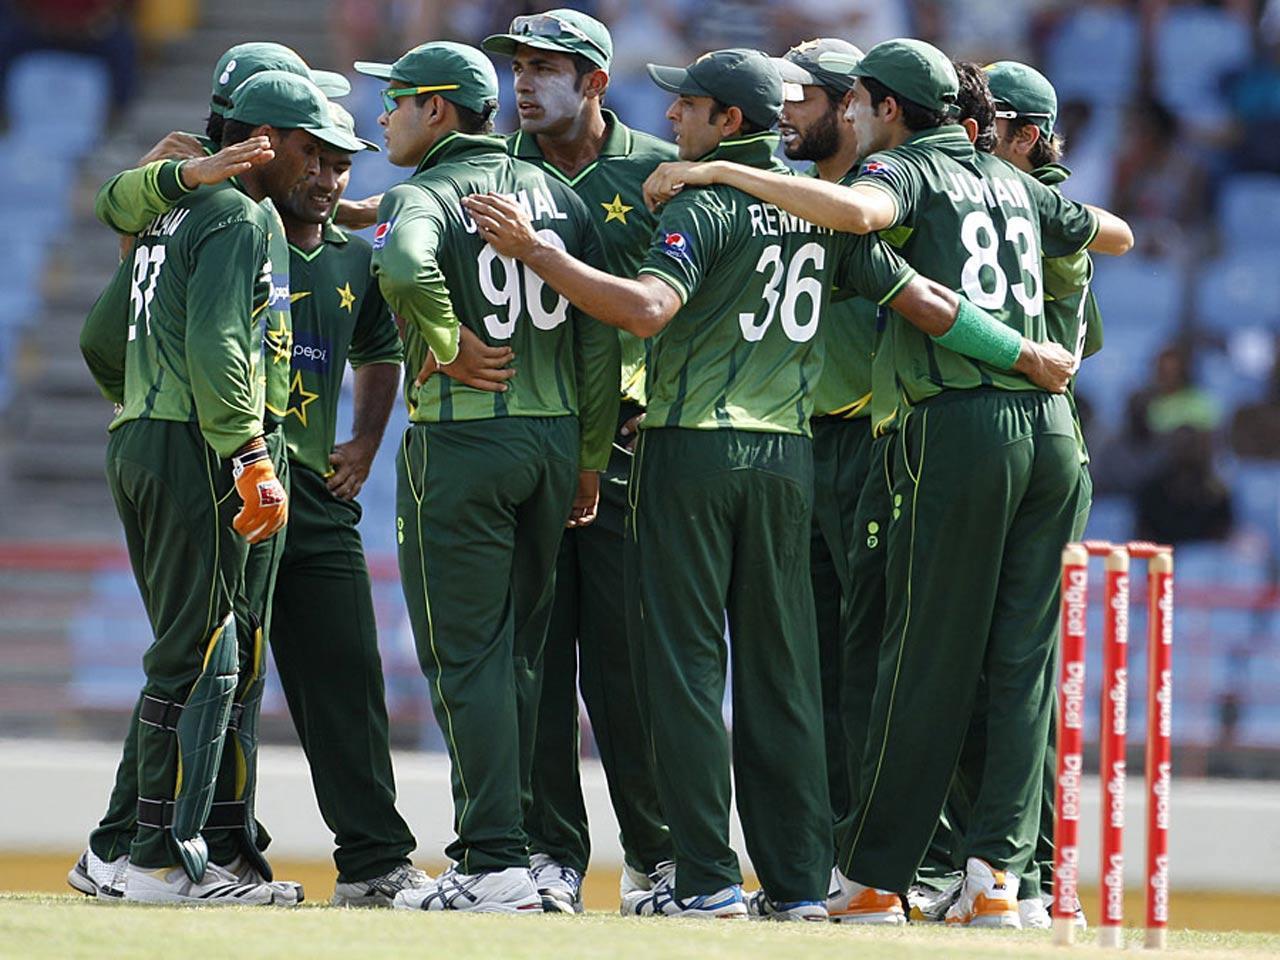 is busy year for Pakistan Cricket Team